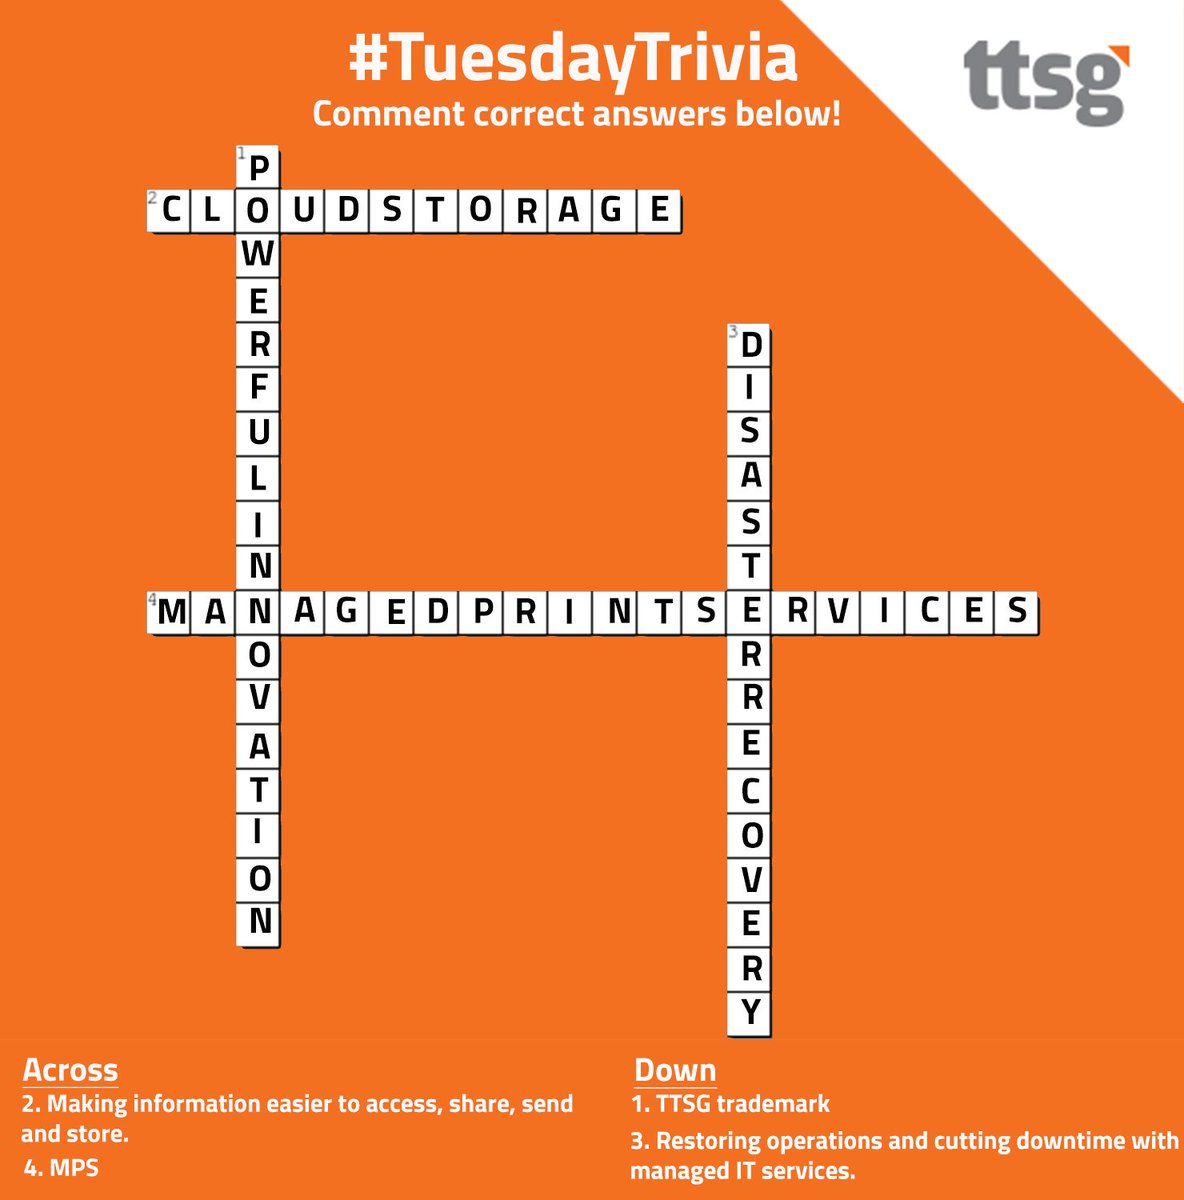 We found the teacher's answer key for #TuesdayTrivia 🤫

#Crossword #Puzzled #PuzzleLover #DidYouKnow #Facts #CompanyKnowledge #Across #Down #KnowThis #ttsgFacts #AnswersBelow